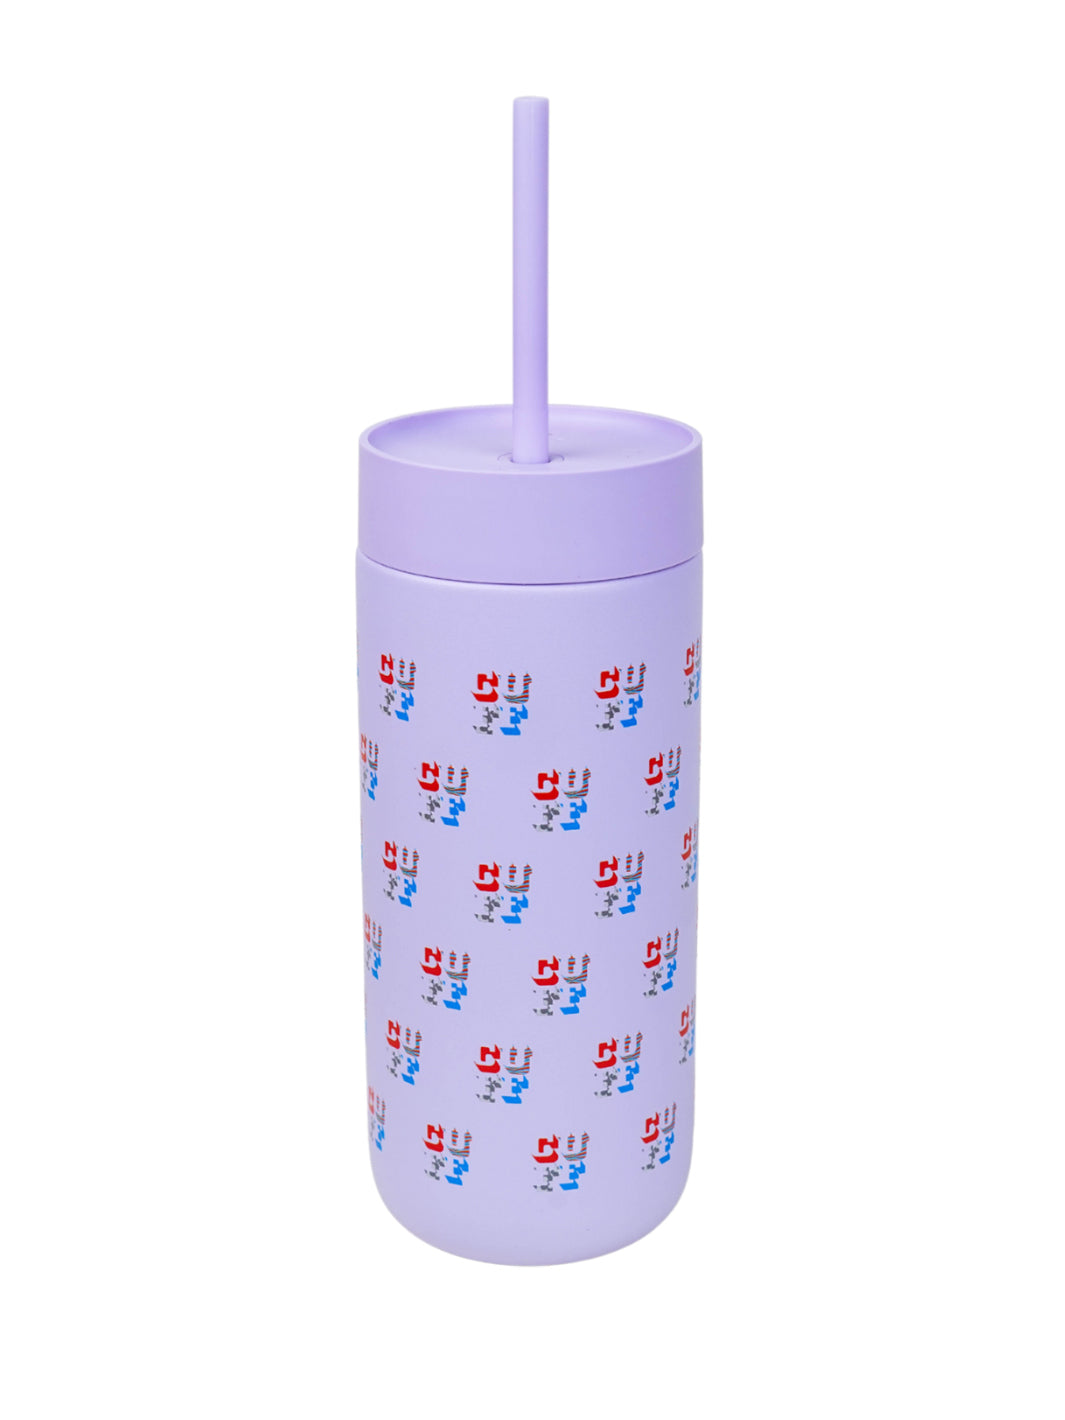 FELLOW "CUFF" Carter Cold Tumbler (16oz/473ml) [Limited Edition]